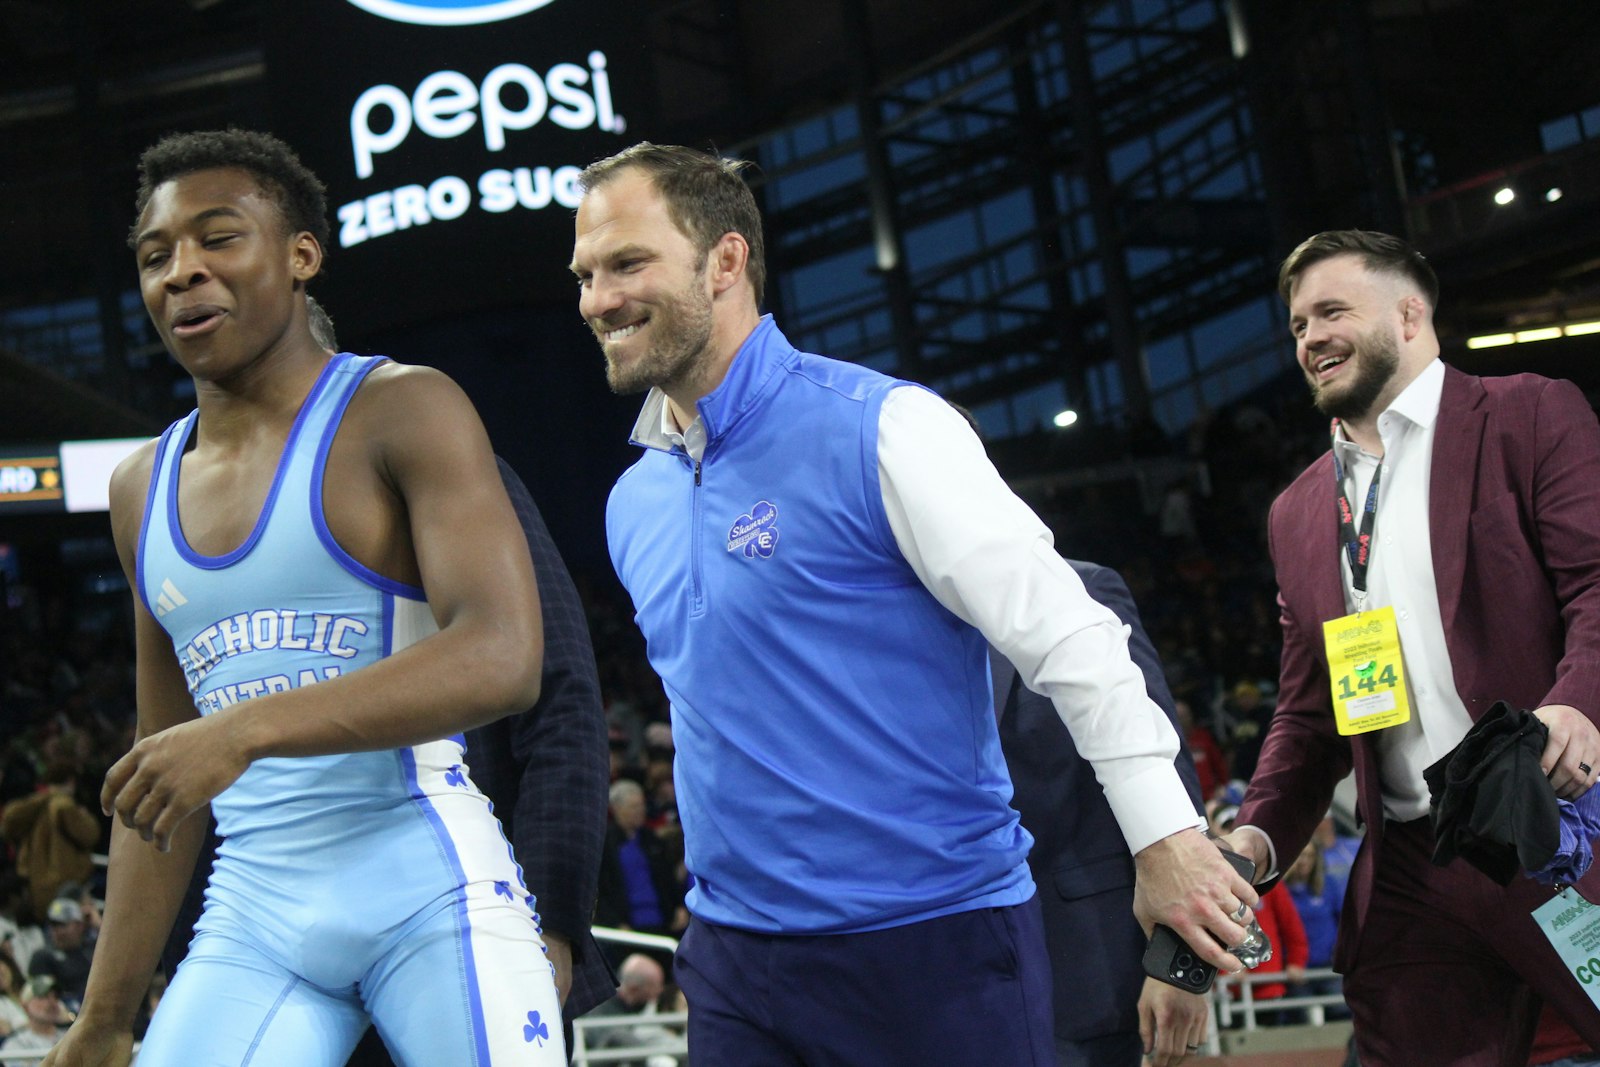 After the final match of the weekend, senior Clayton Jones leaves the mat with his second state championship, followed by head coach Mitch Hancock and assistant Kevin Beasley.